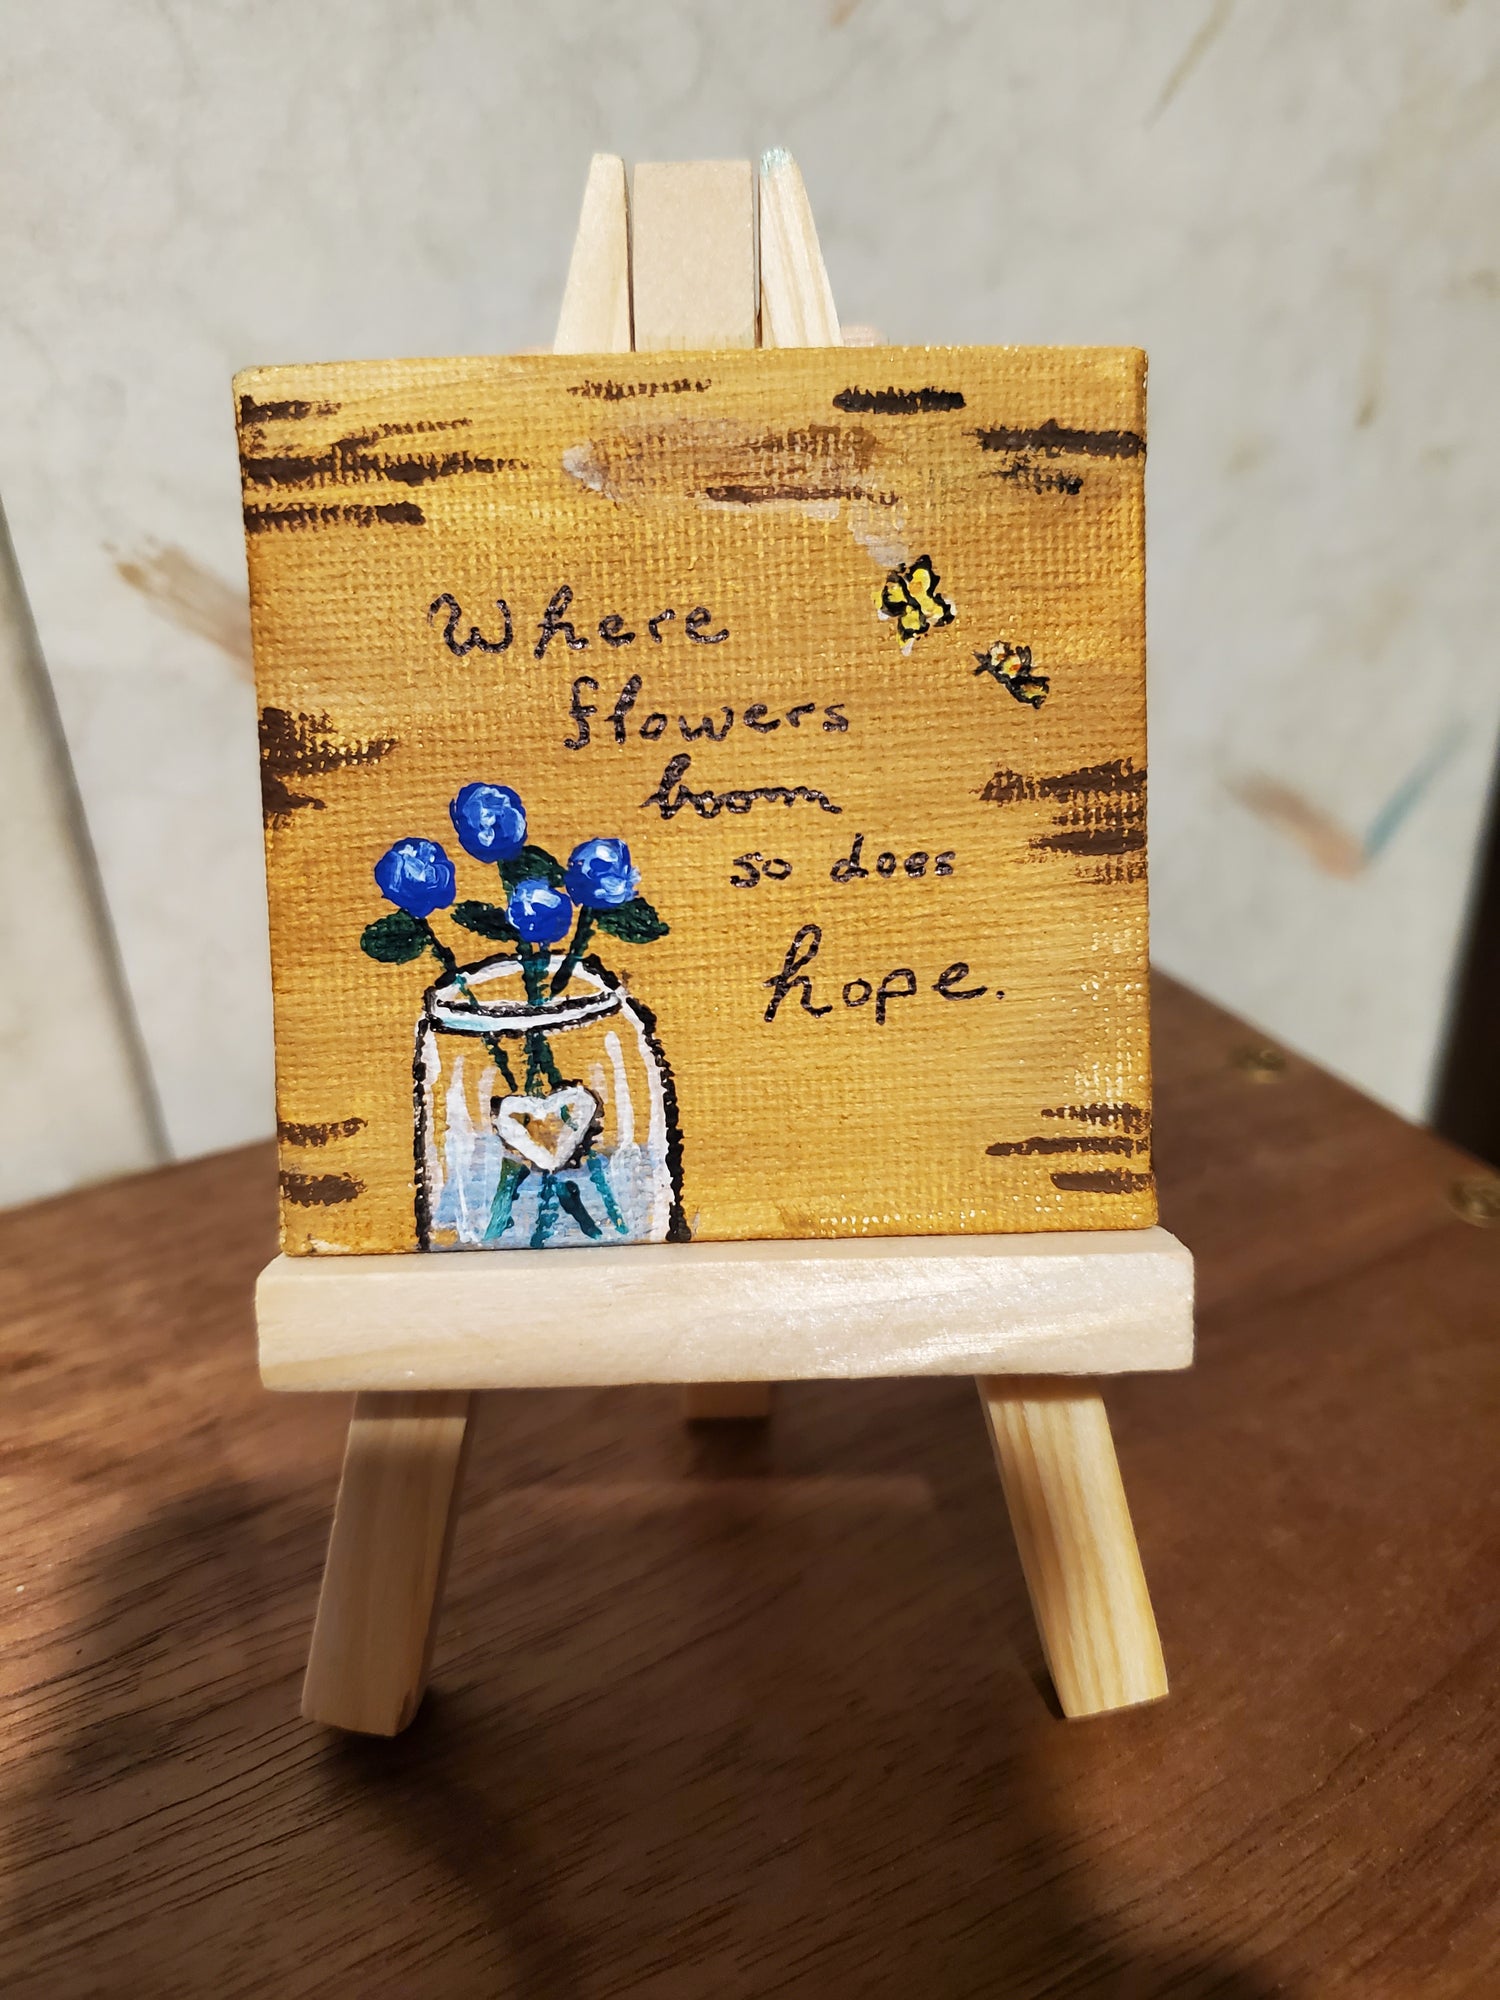 Customized mini canvas with easel